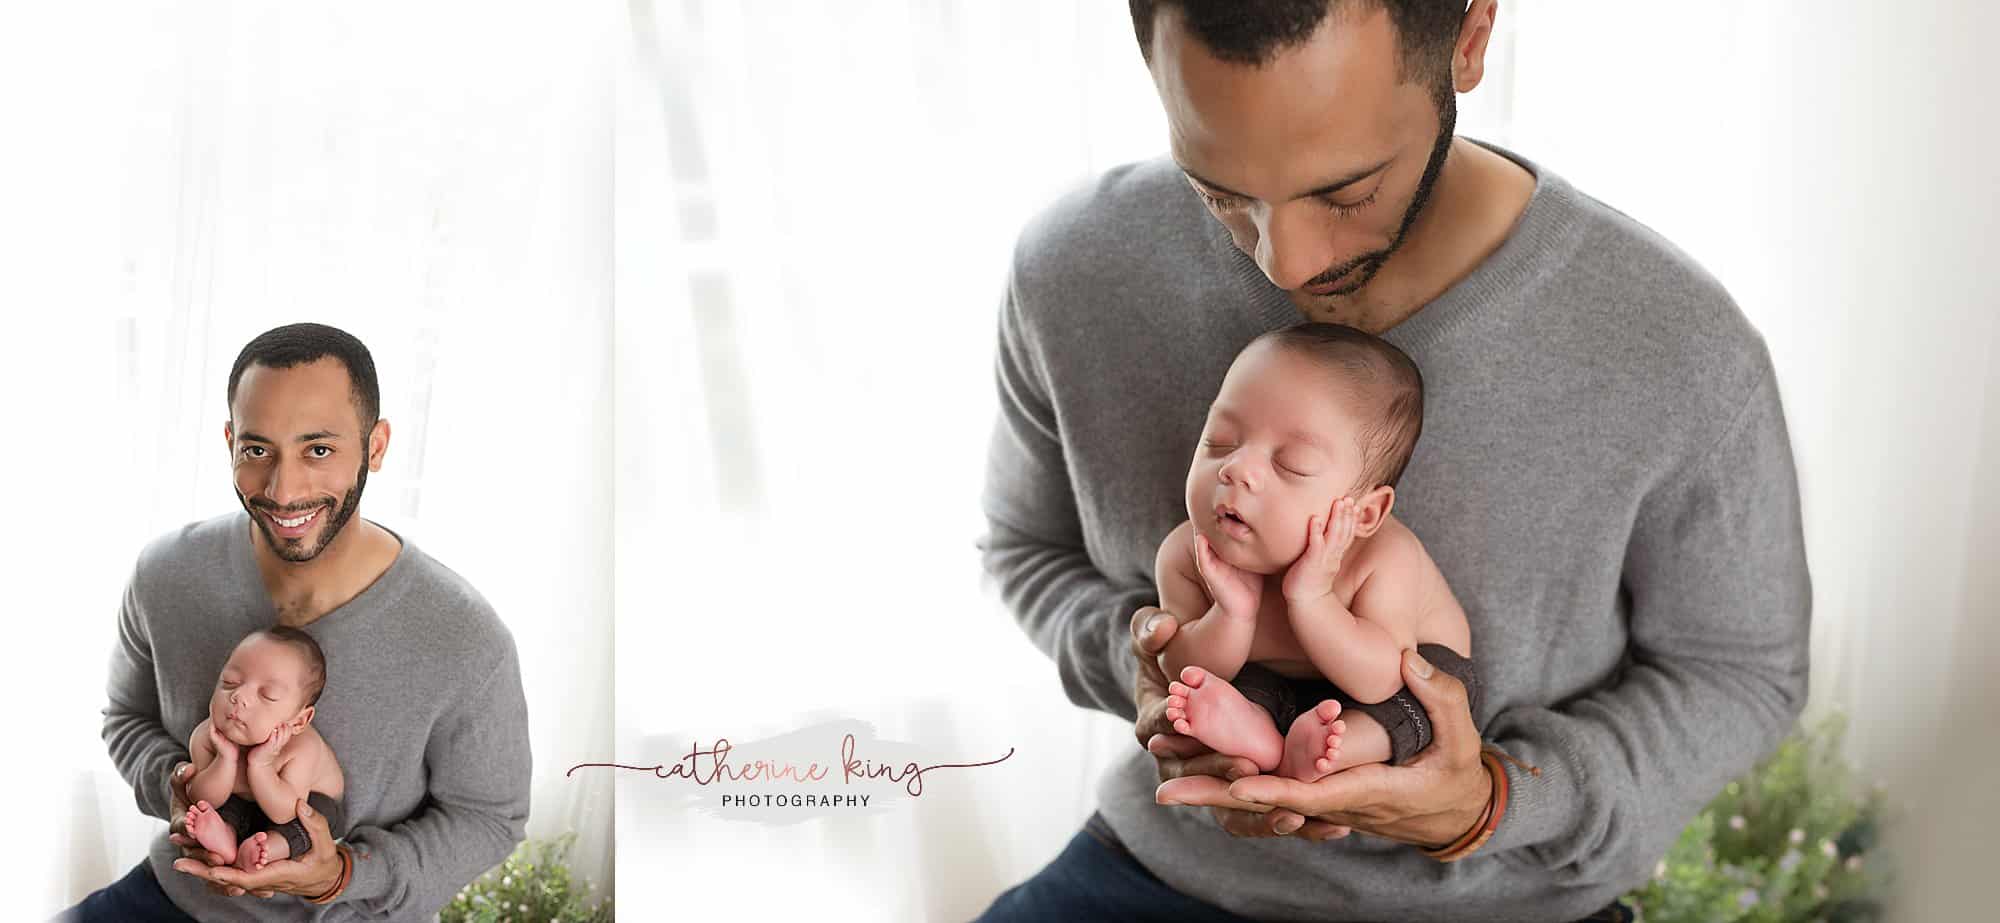 What does All-inclusive newborn photoshoot mean